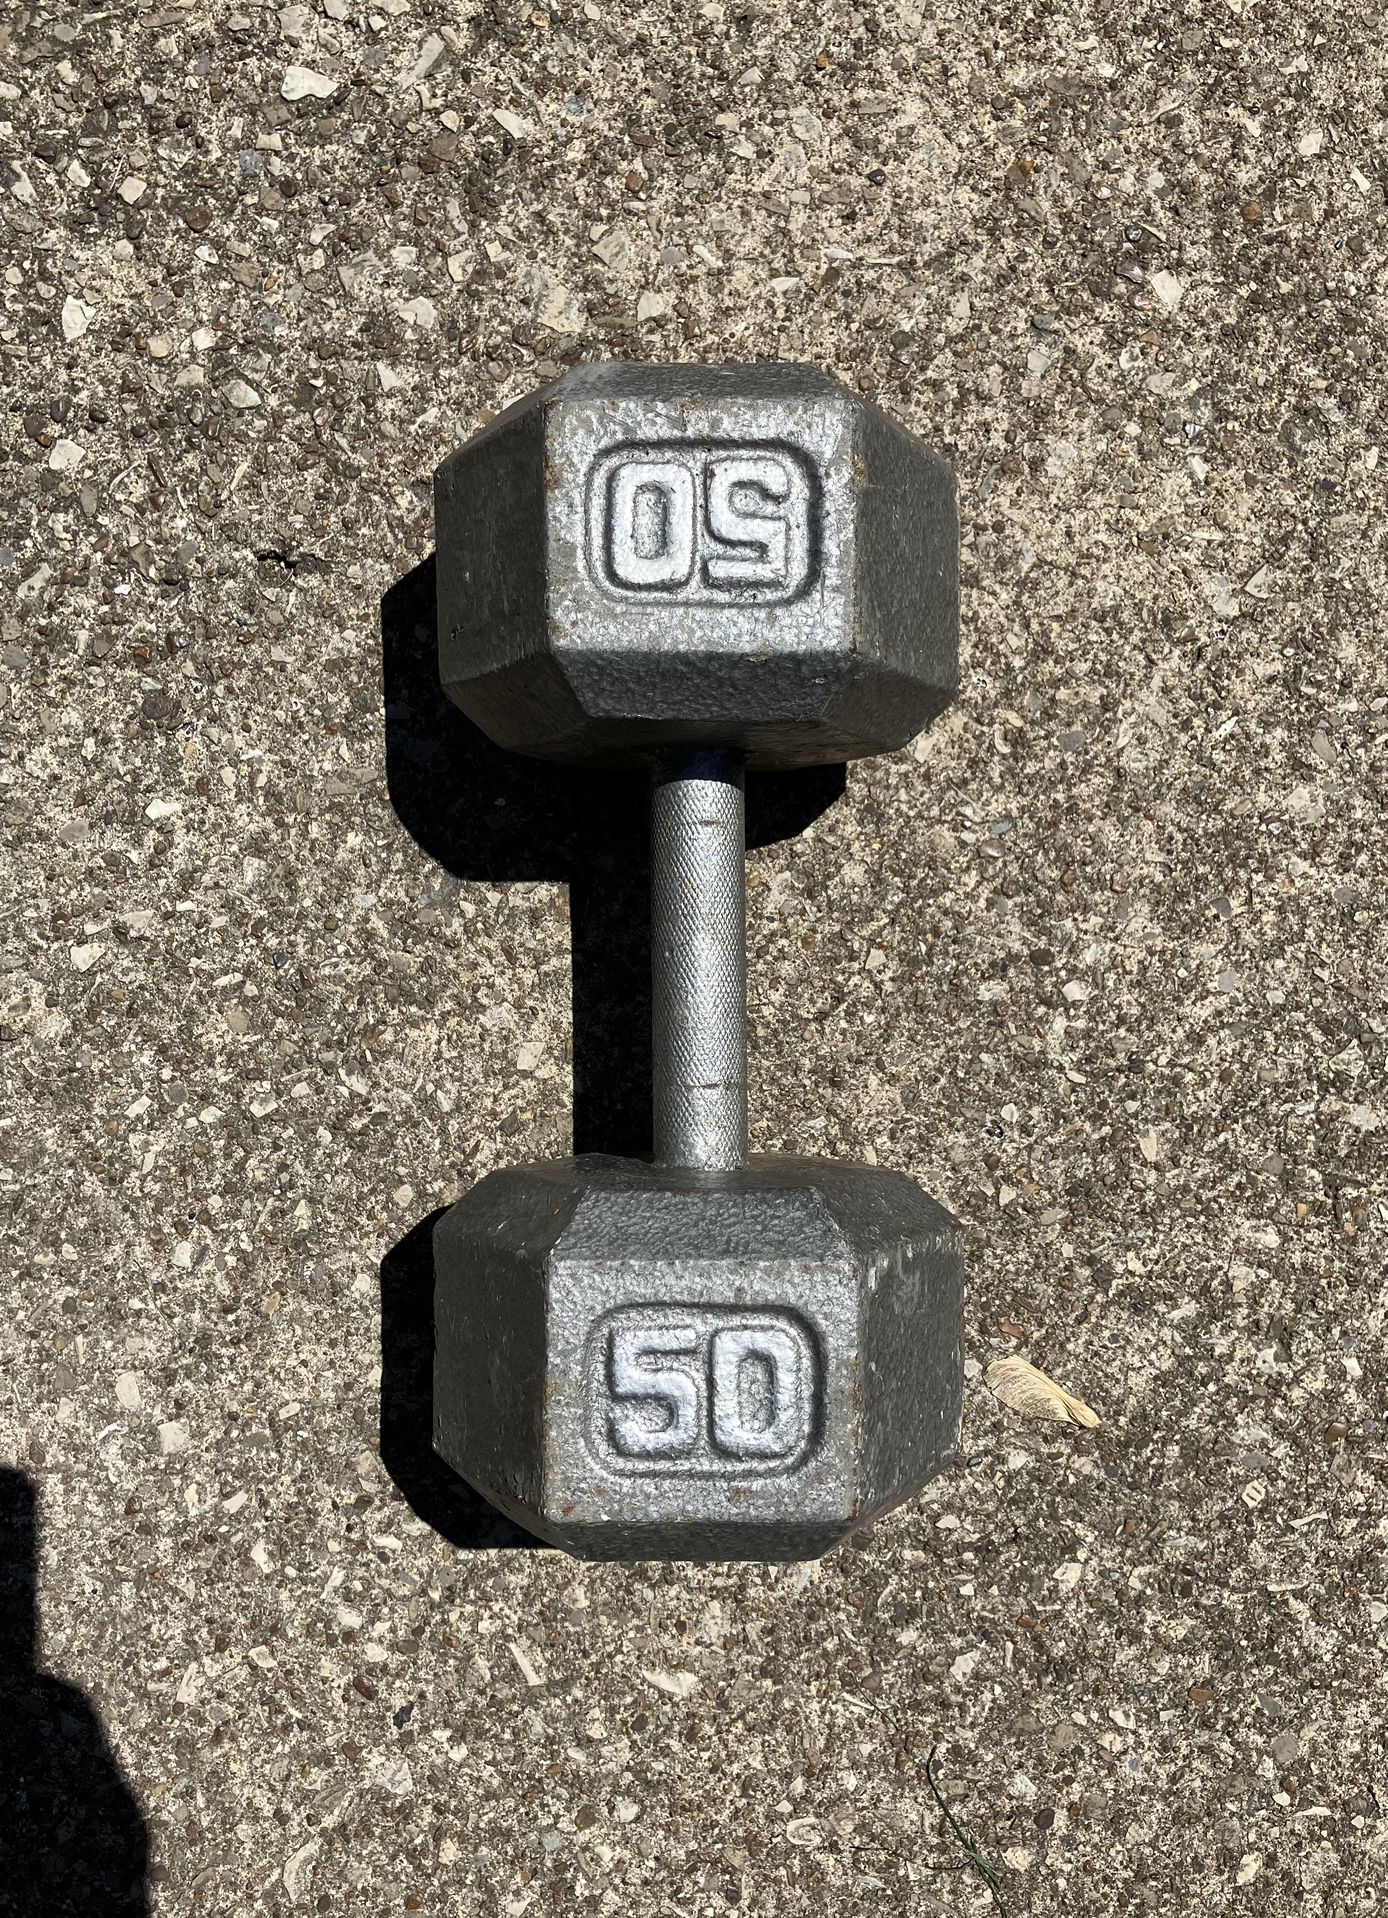 ONE Single (1) 50 lb dumbbell weight pounds pound 50lb 50lbs lbs NOT multiple dumbbells weights Cast Iron hex